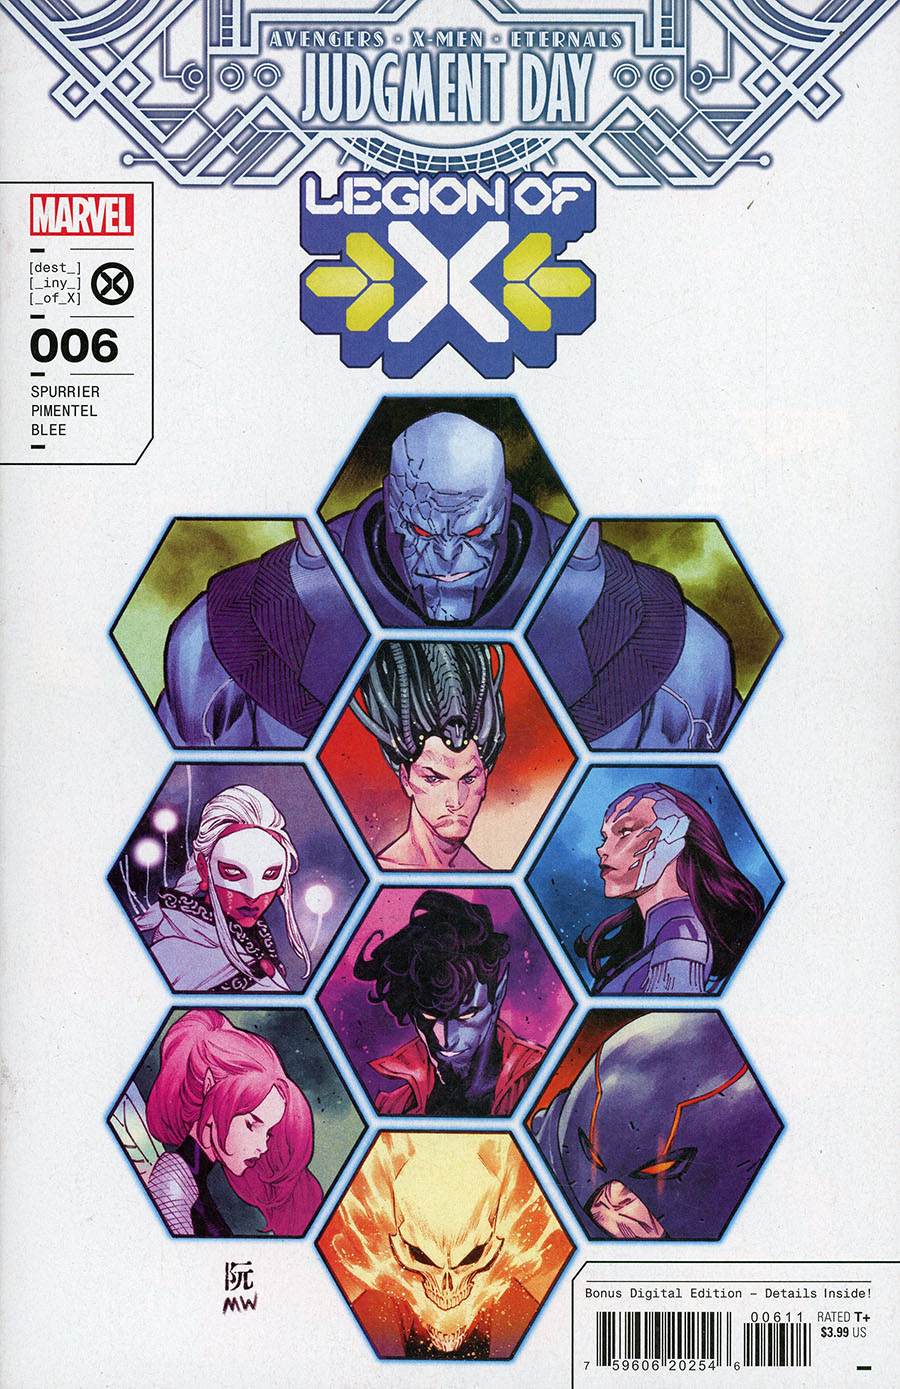 Legion Of X #6 (A.X.E. Judgment Day Tie-In)